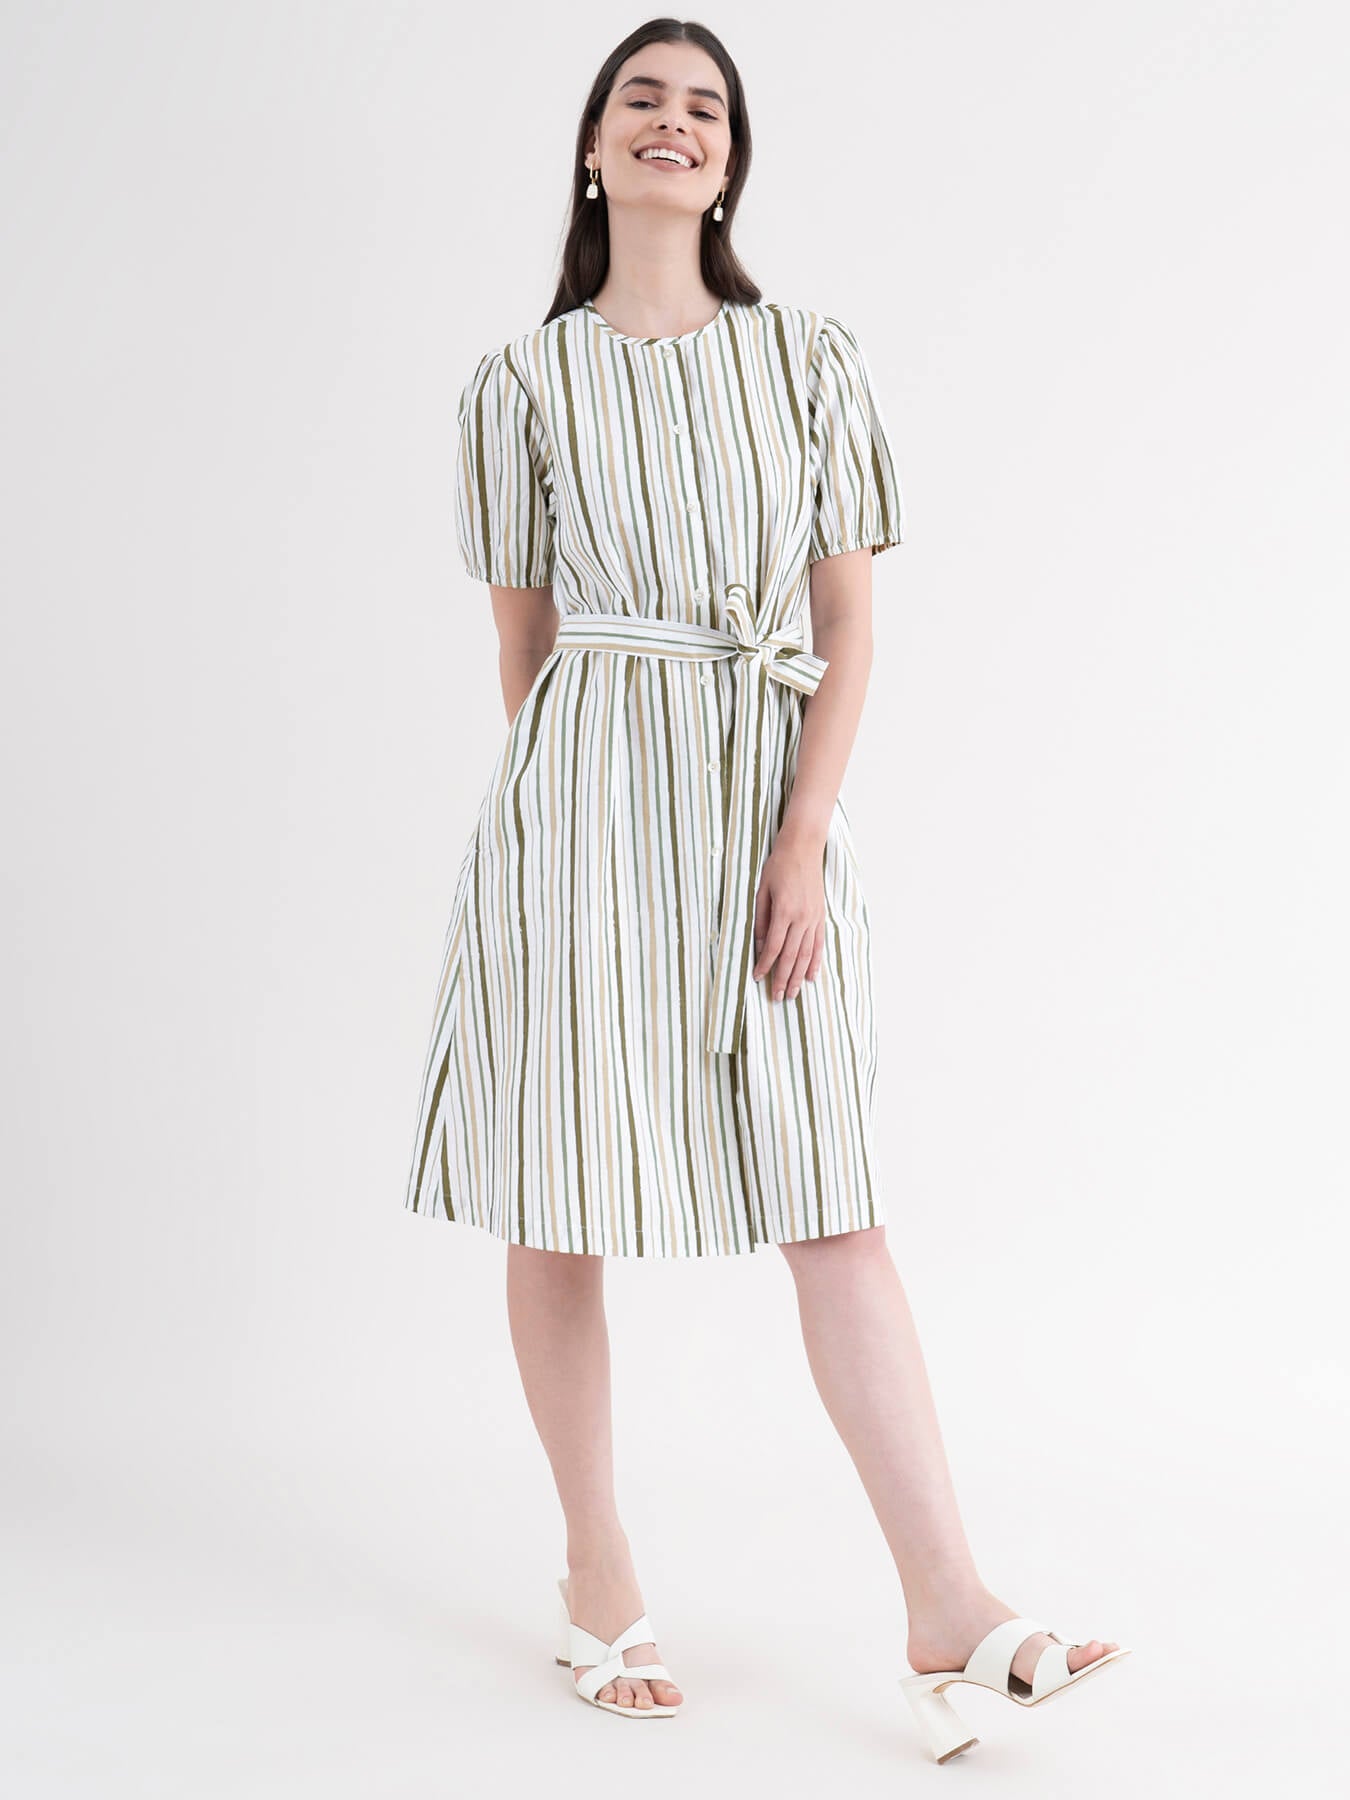 Linen Shirt Dress - White and Olive